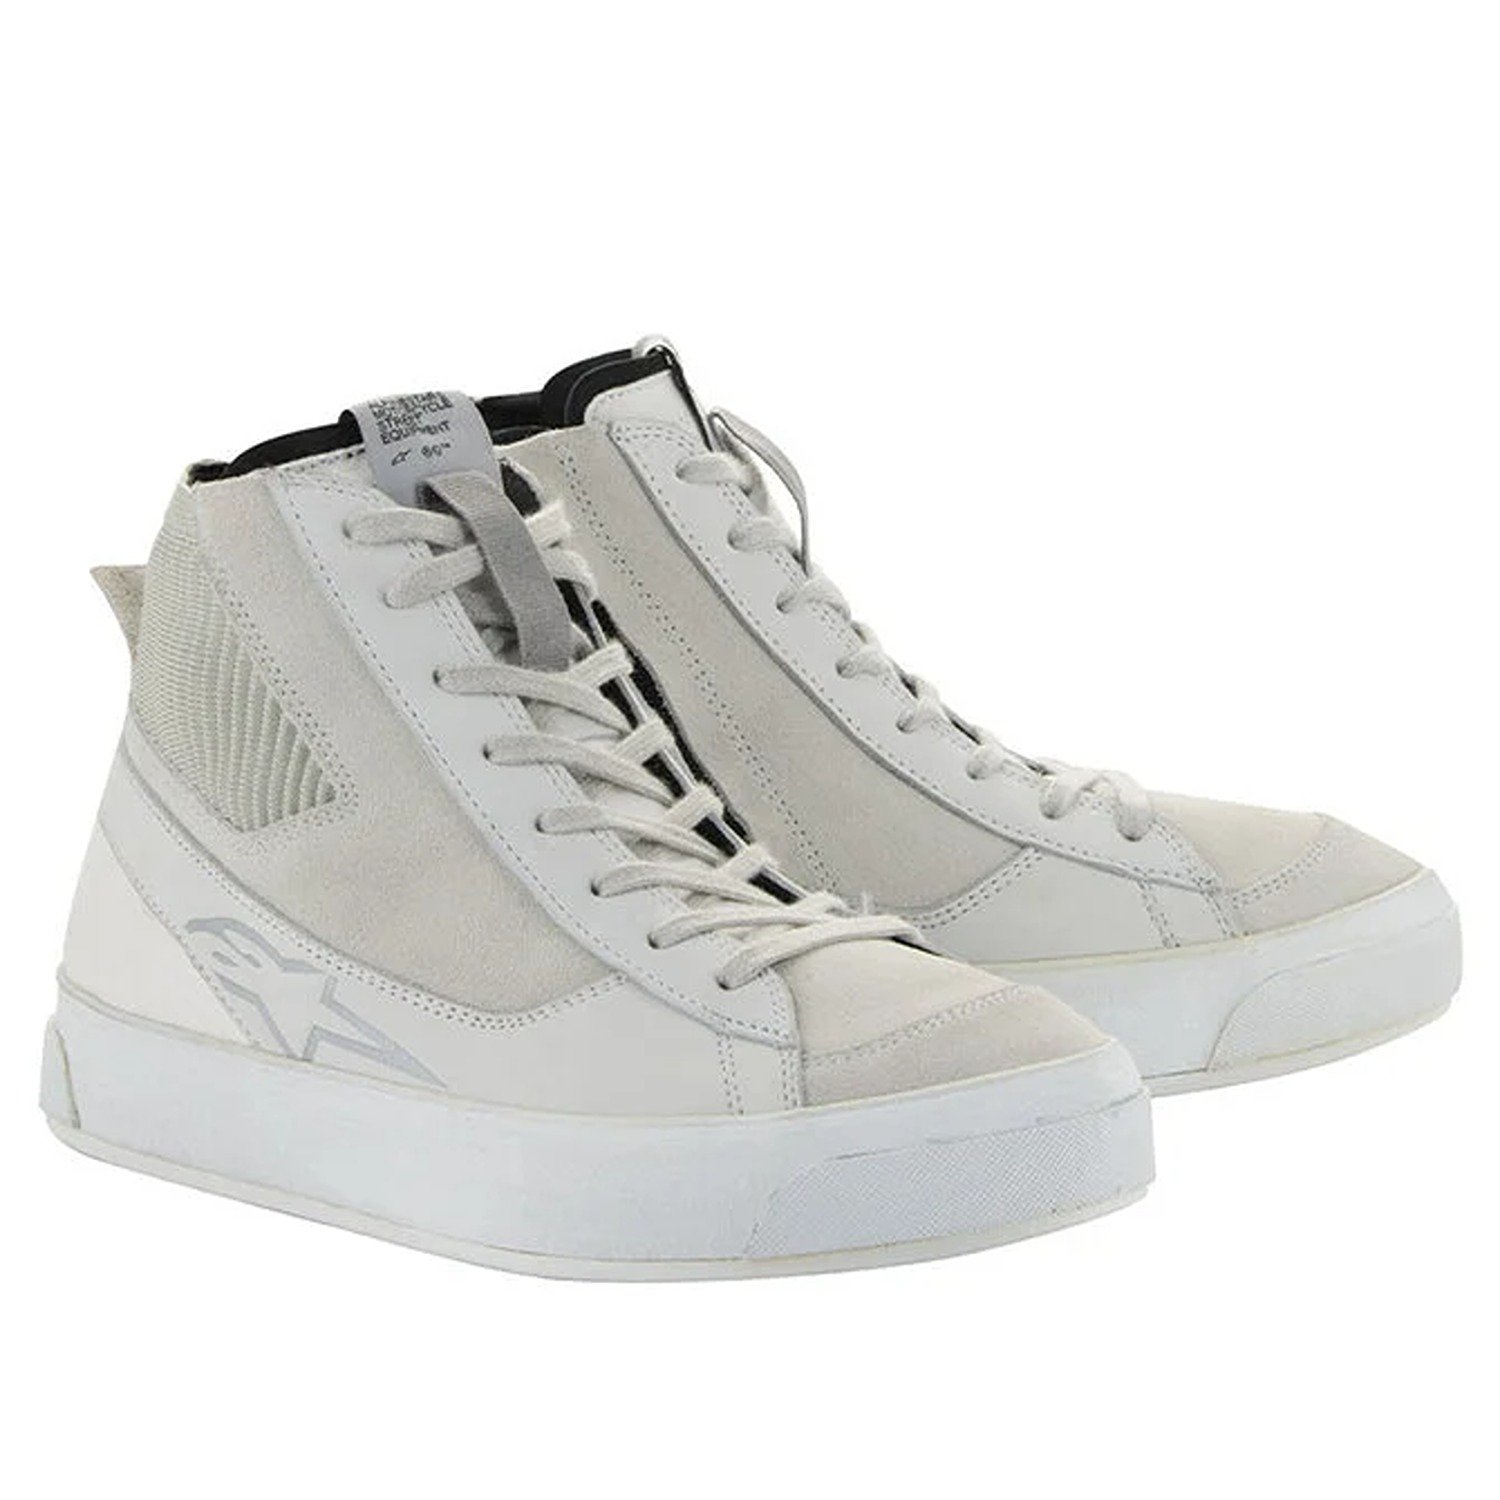 Image of Alpinestars Stated Shoes White Cool Gray Talla US 105